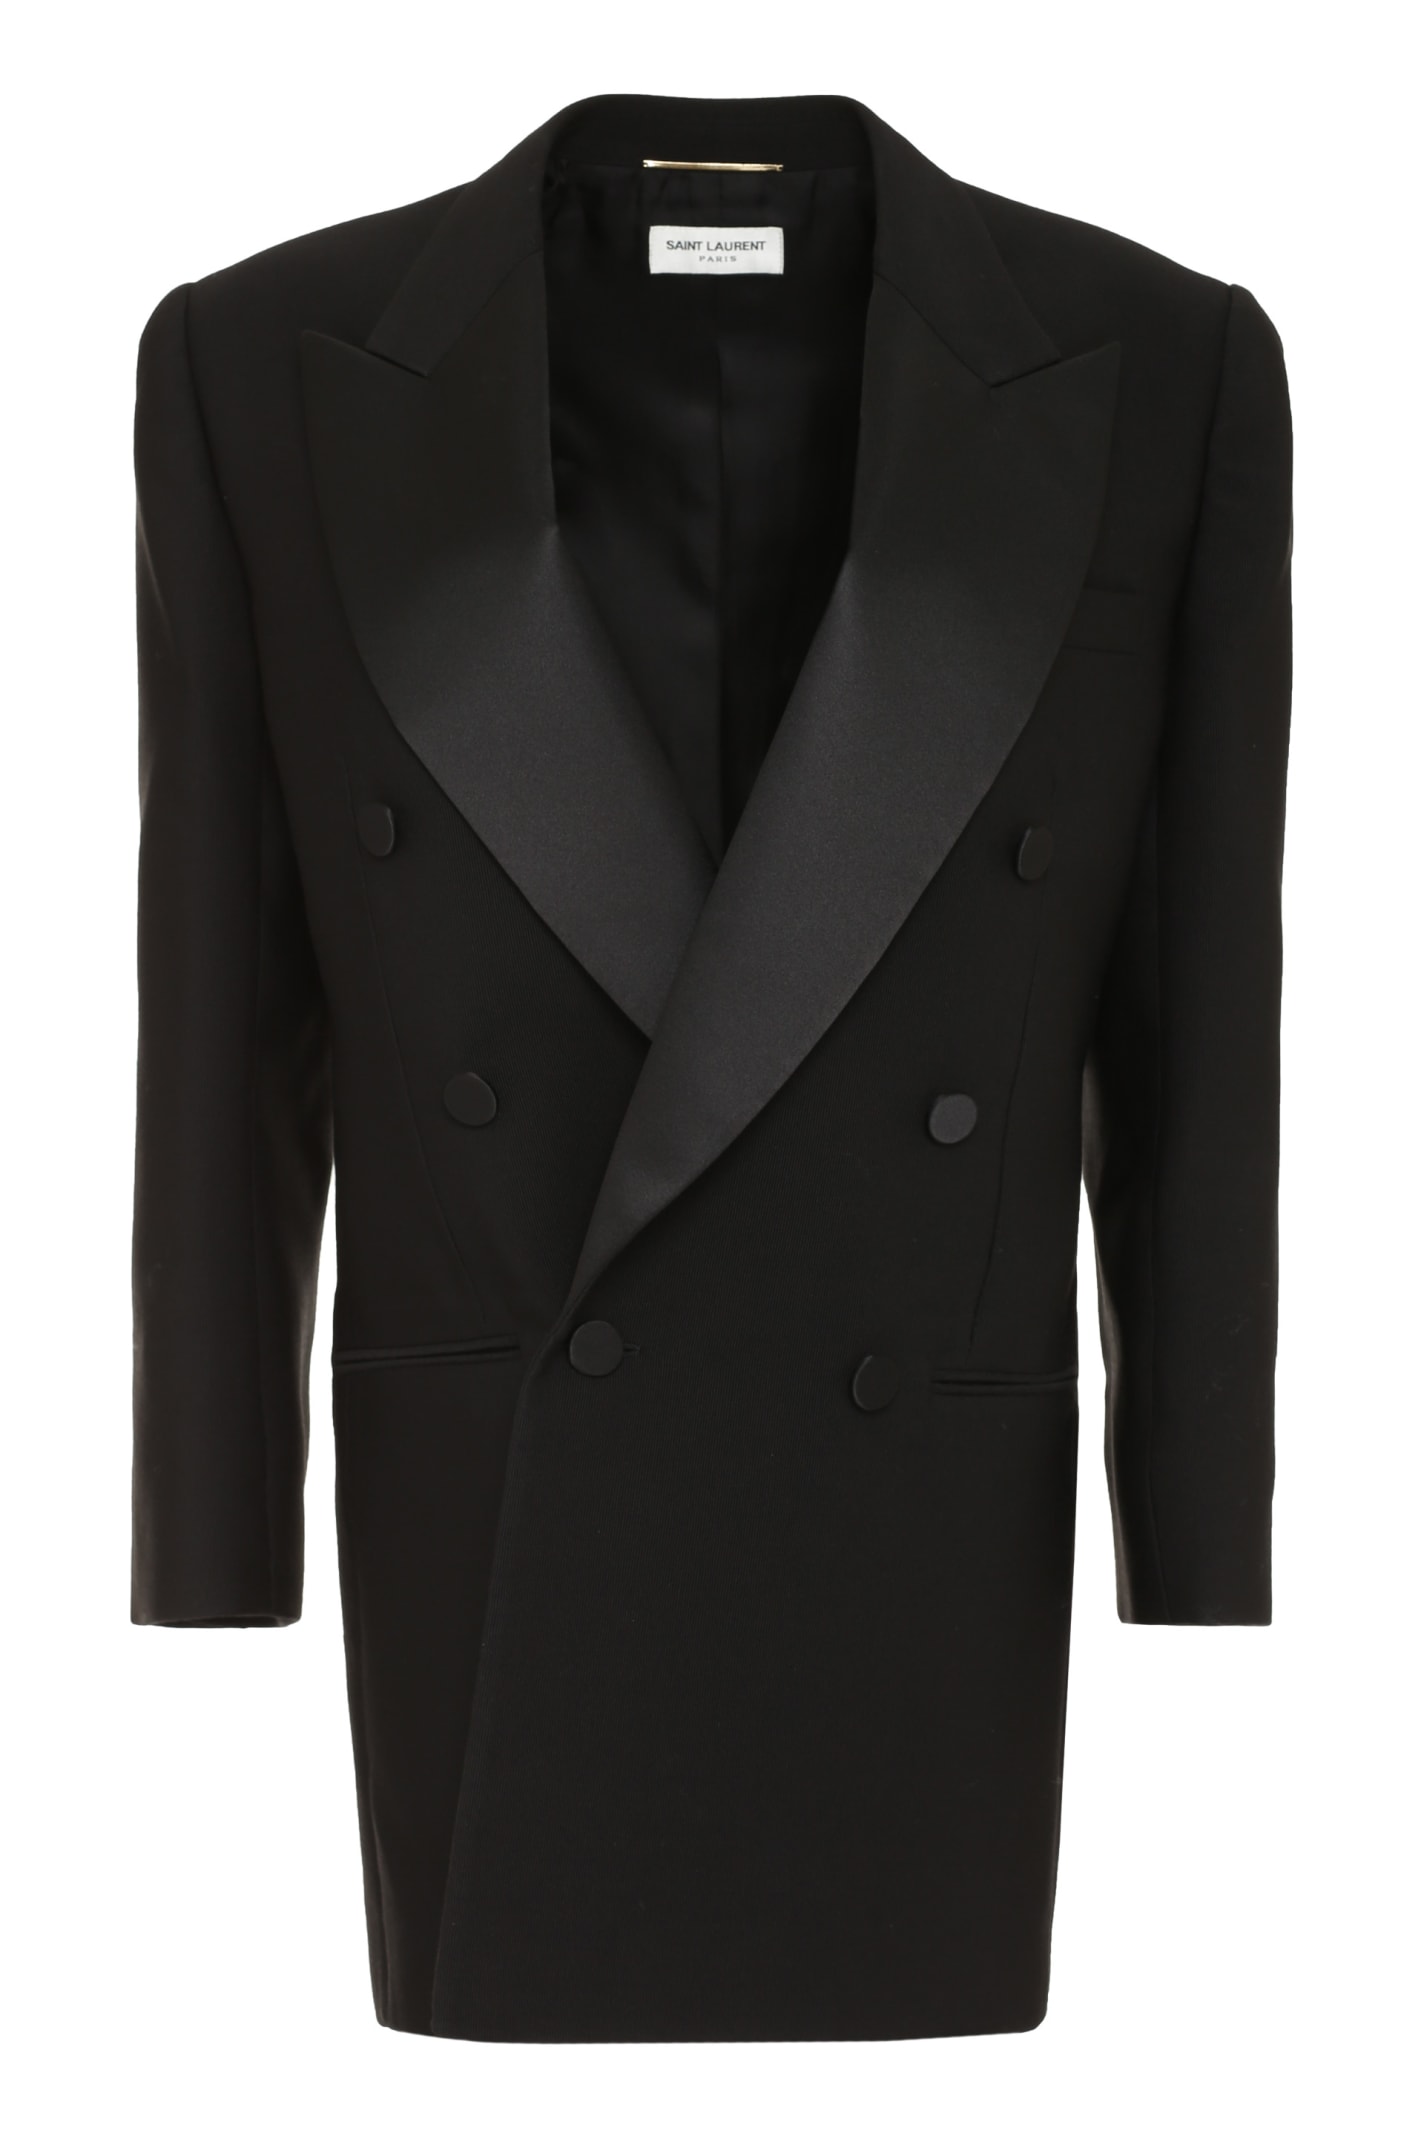 Saint Laurent Double-breasted Wool Jacket